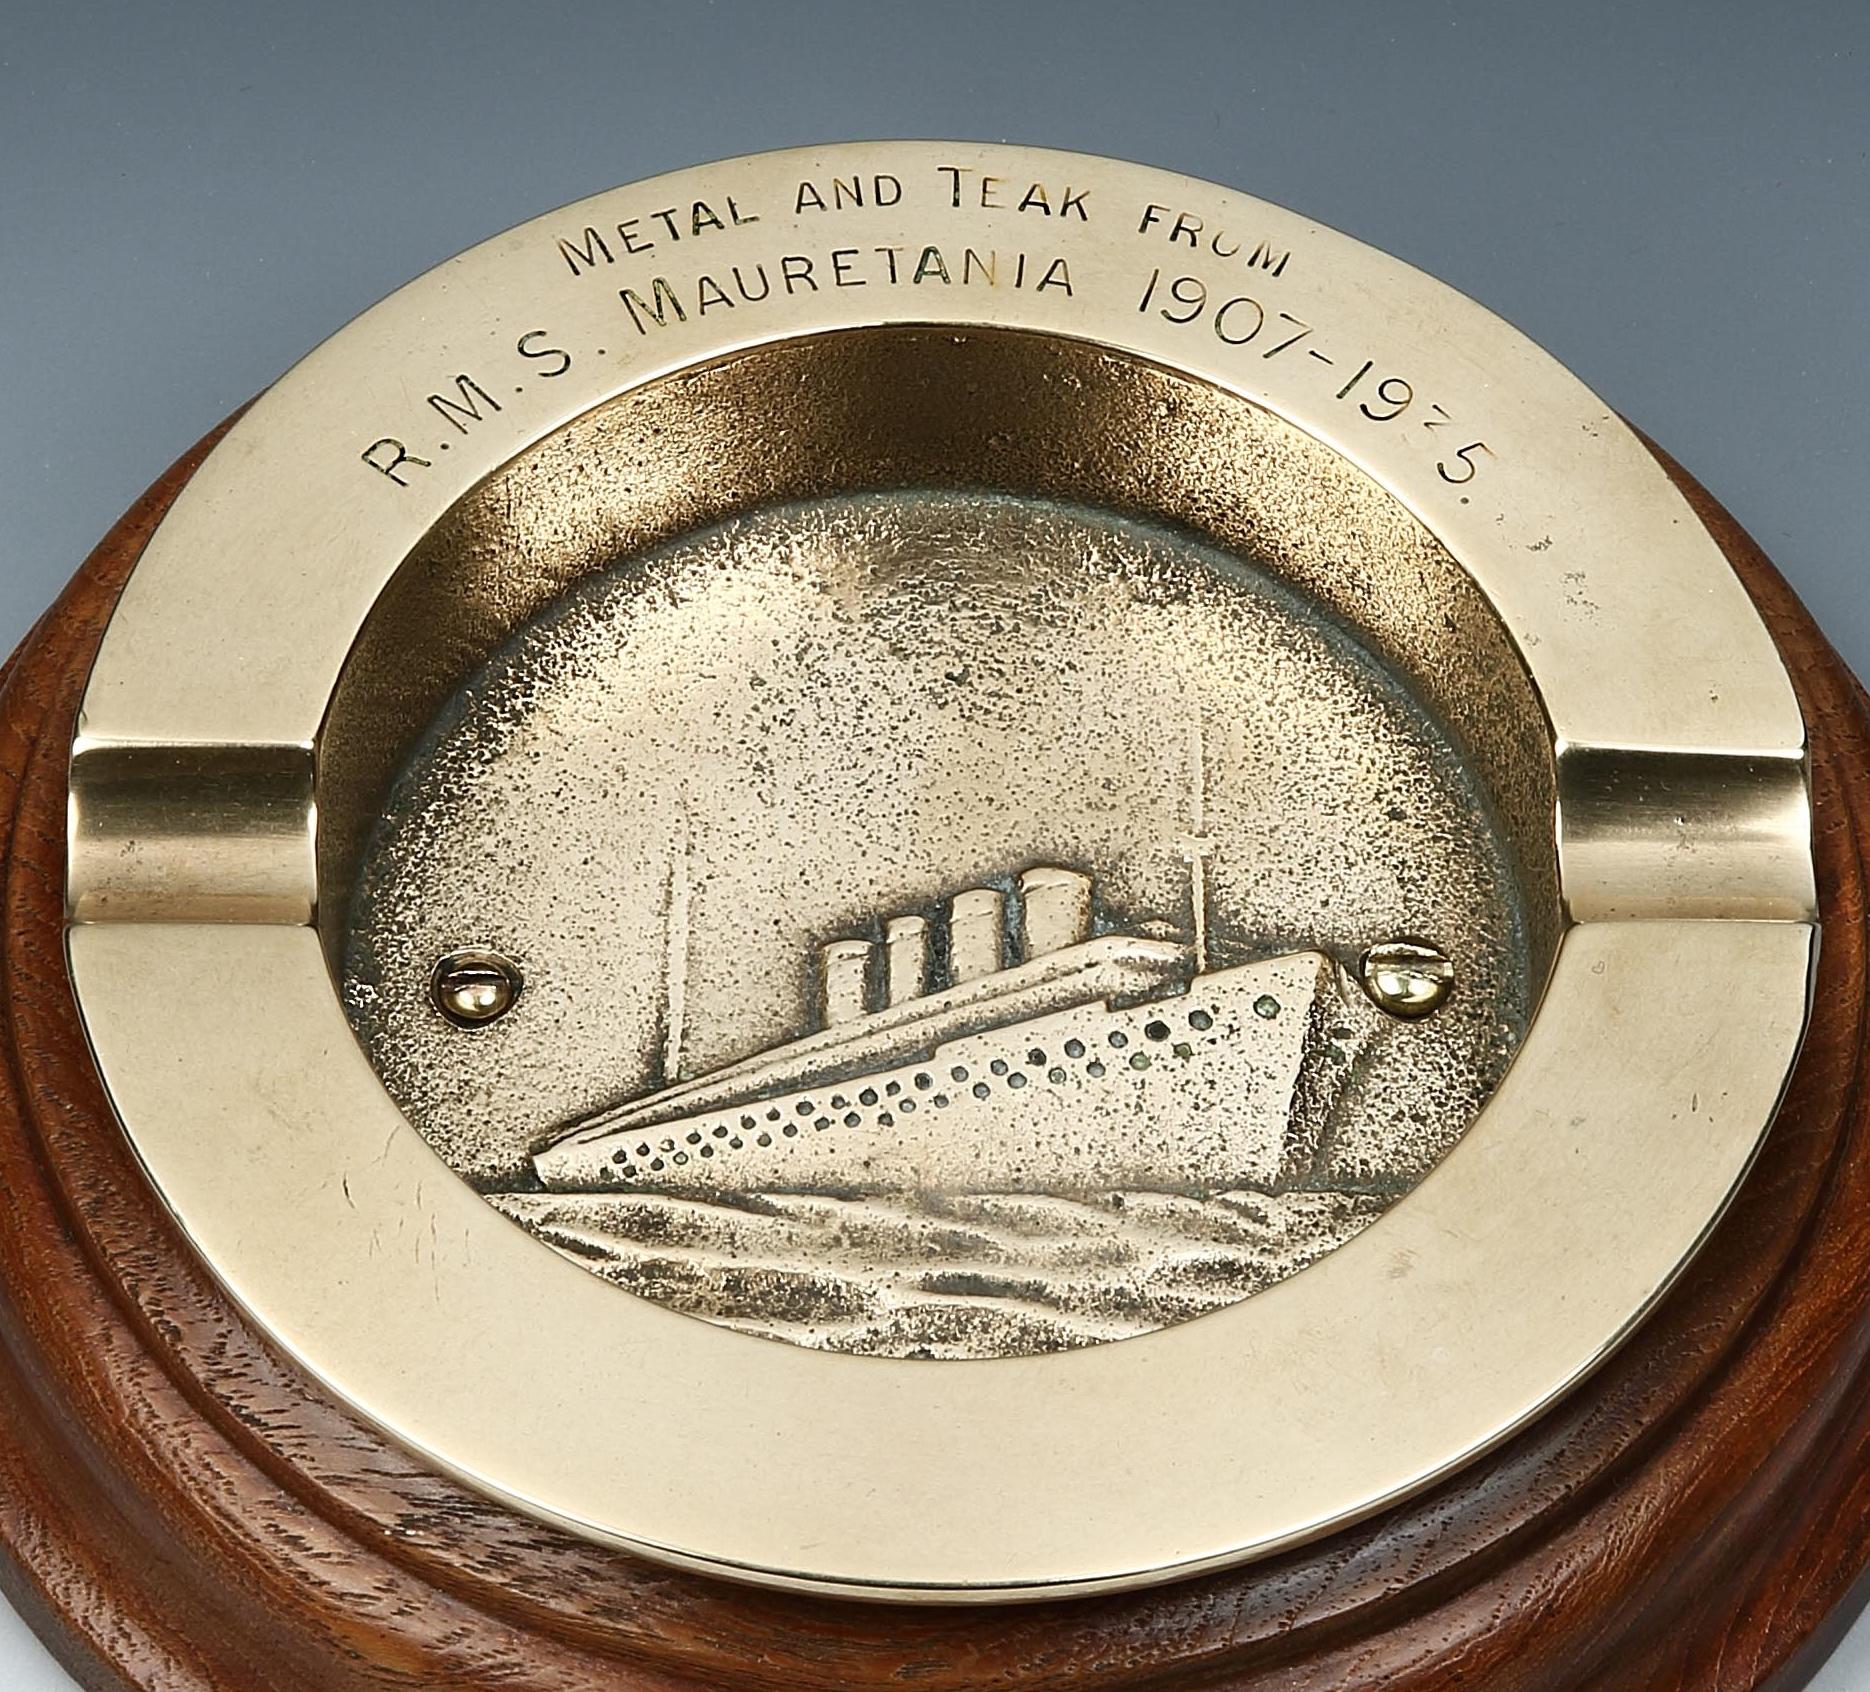 R.M.S Mauretania

A commemorative ashtray made from materials salvaged from one of the greatest ocean liners of all time, R.M.S Mauretania. The central polished brass bowl with polished teak surround has two cigar rests and an image of the liner